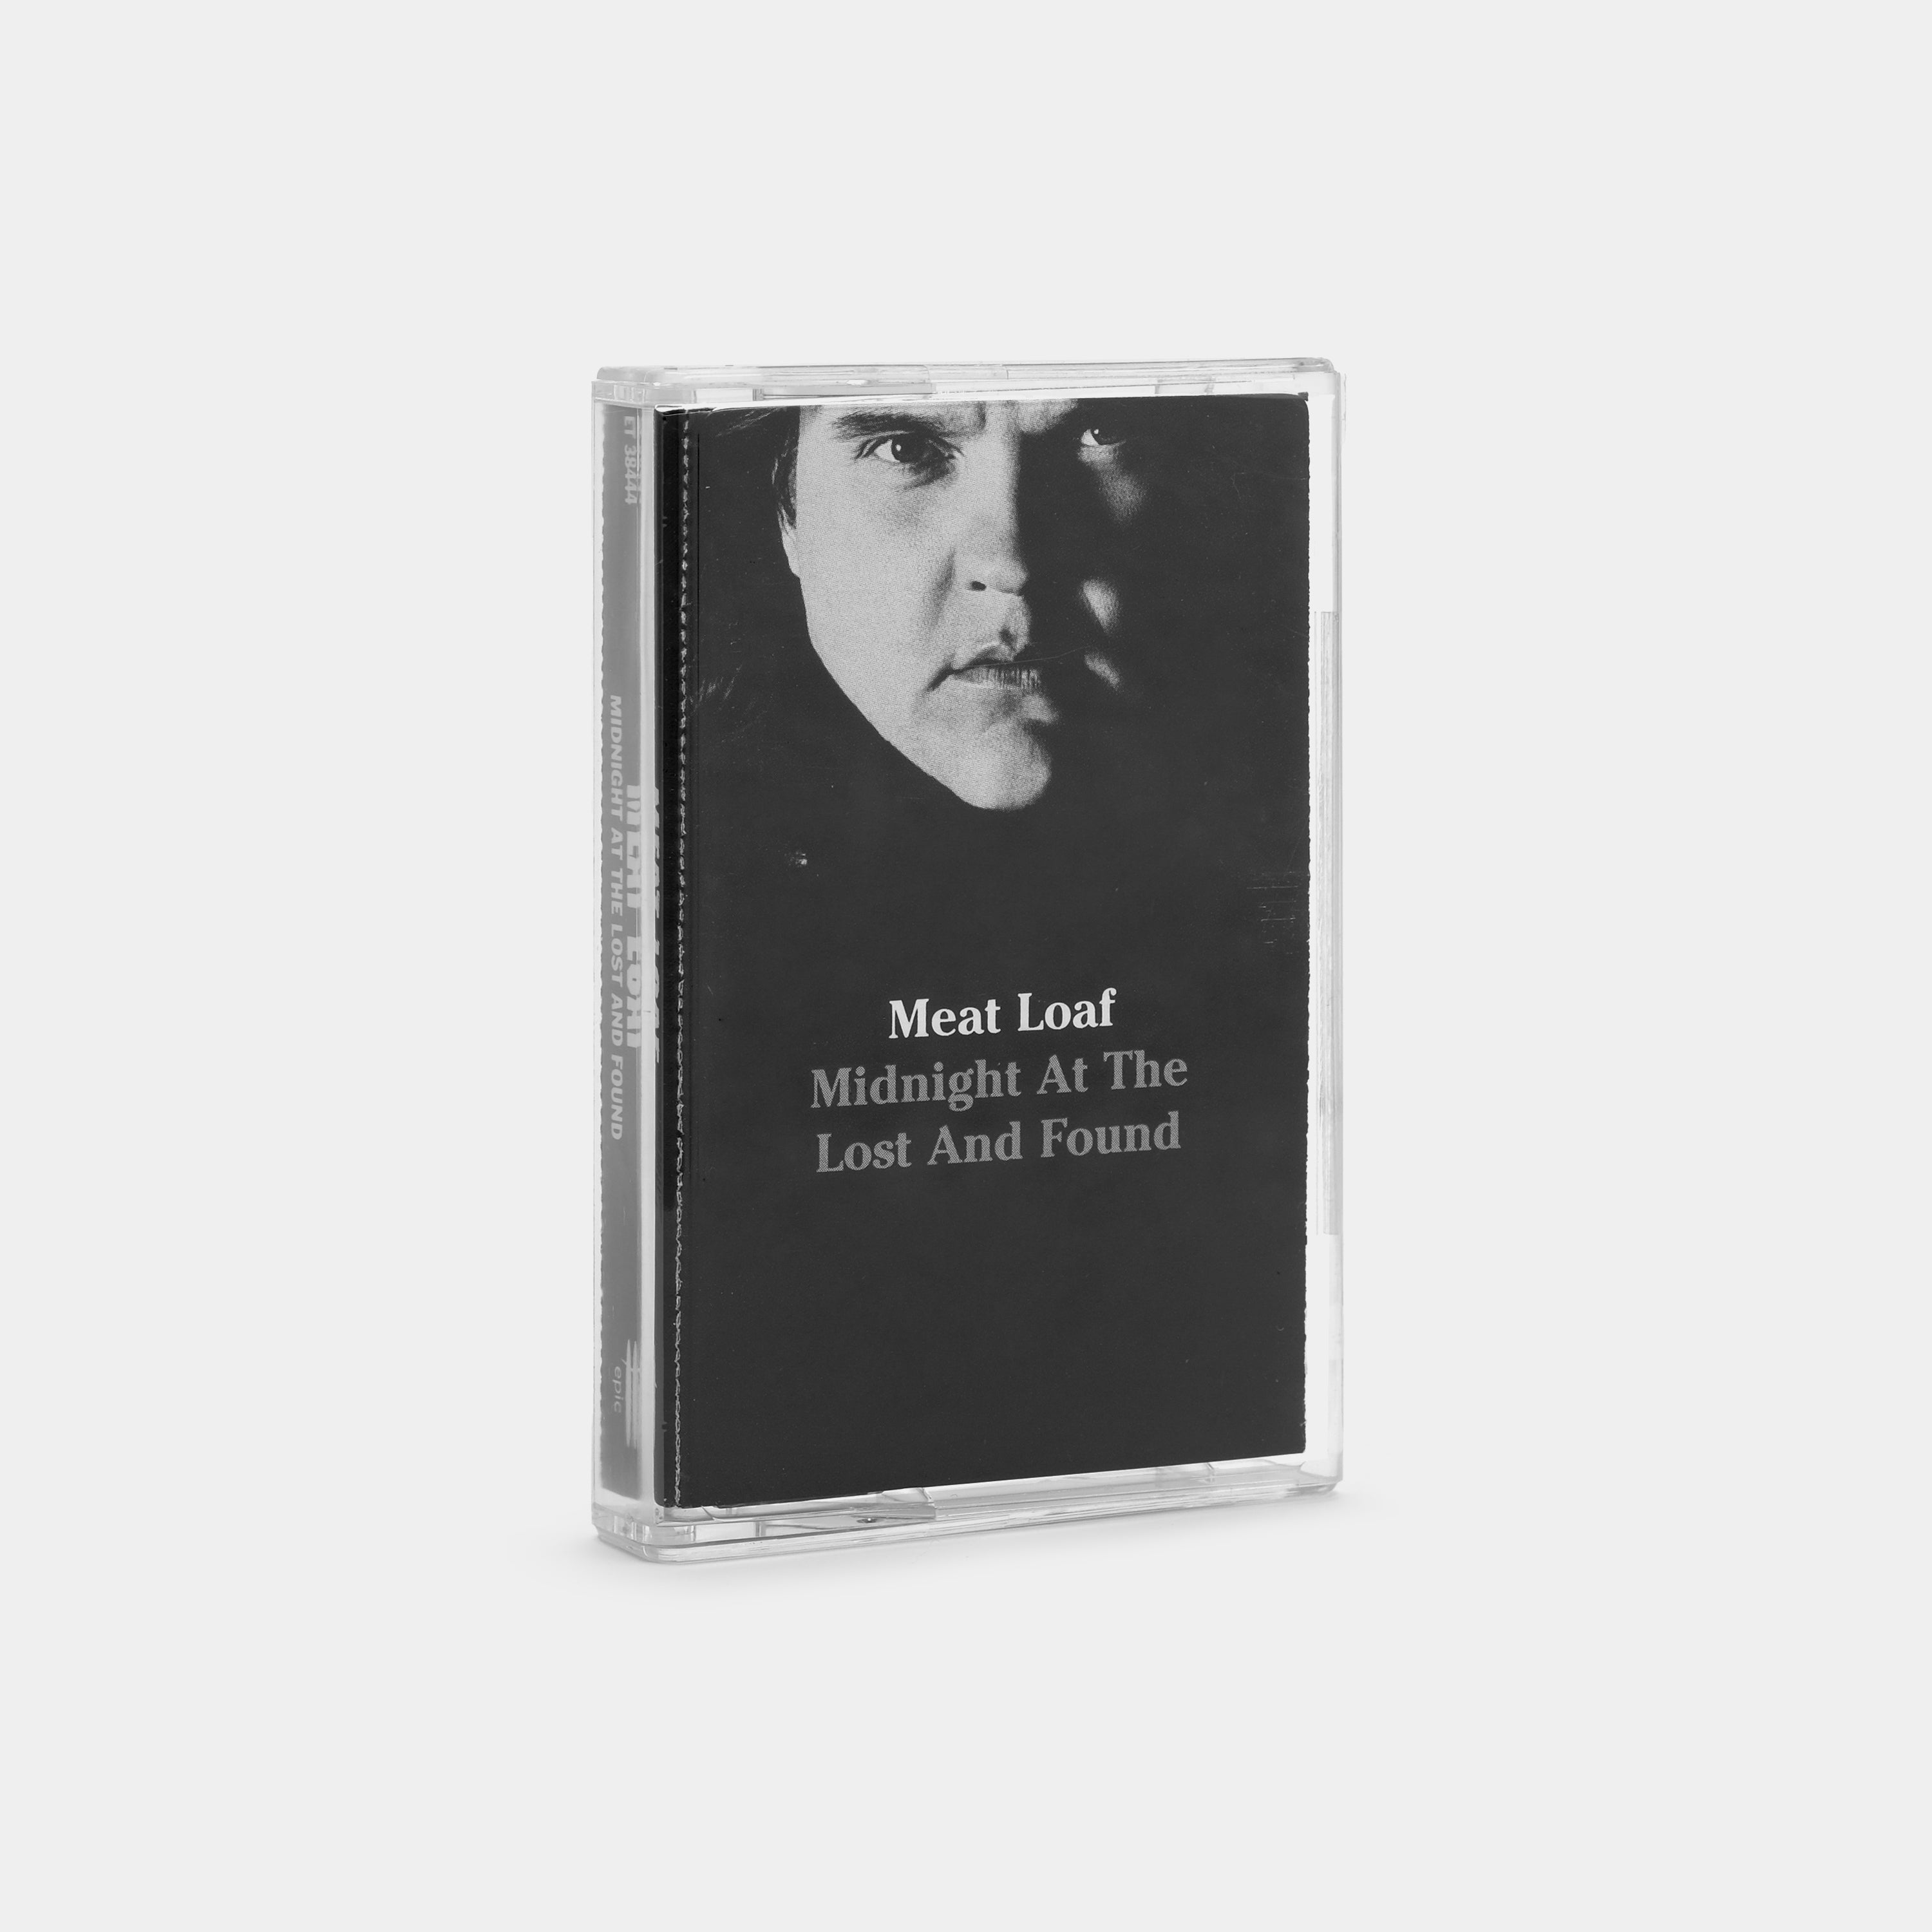 Meat Loaf - Midnight At The Lost And Found Cassette Tape